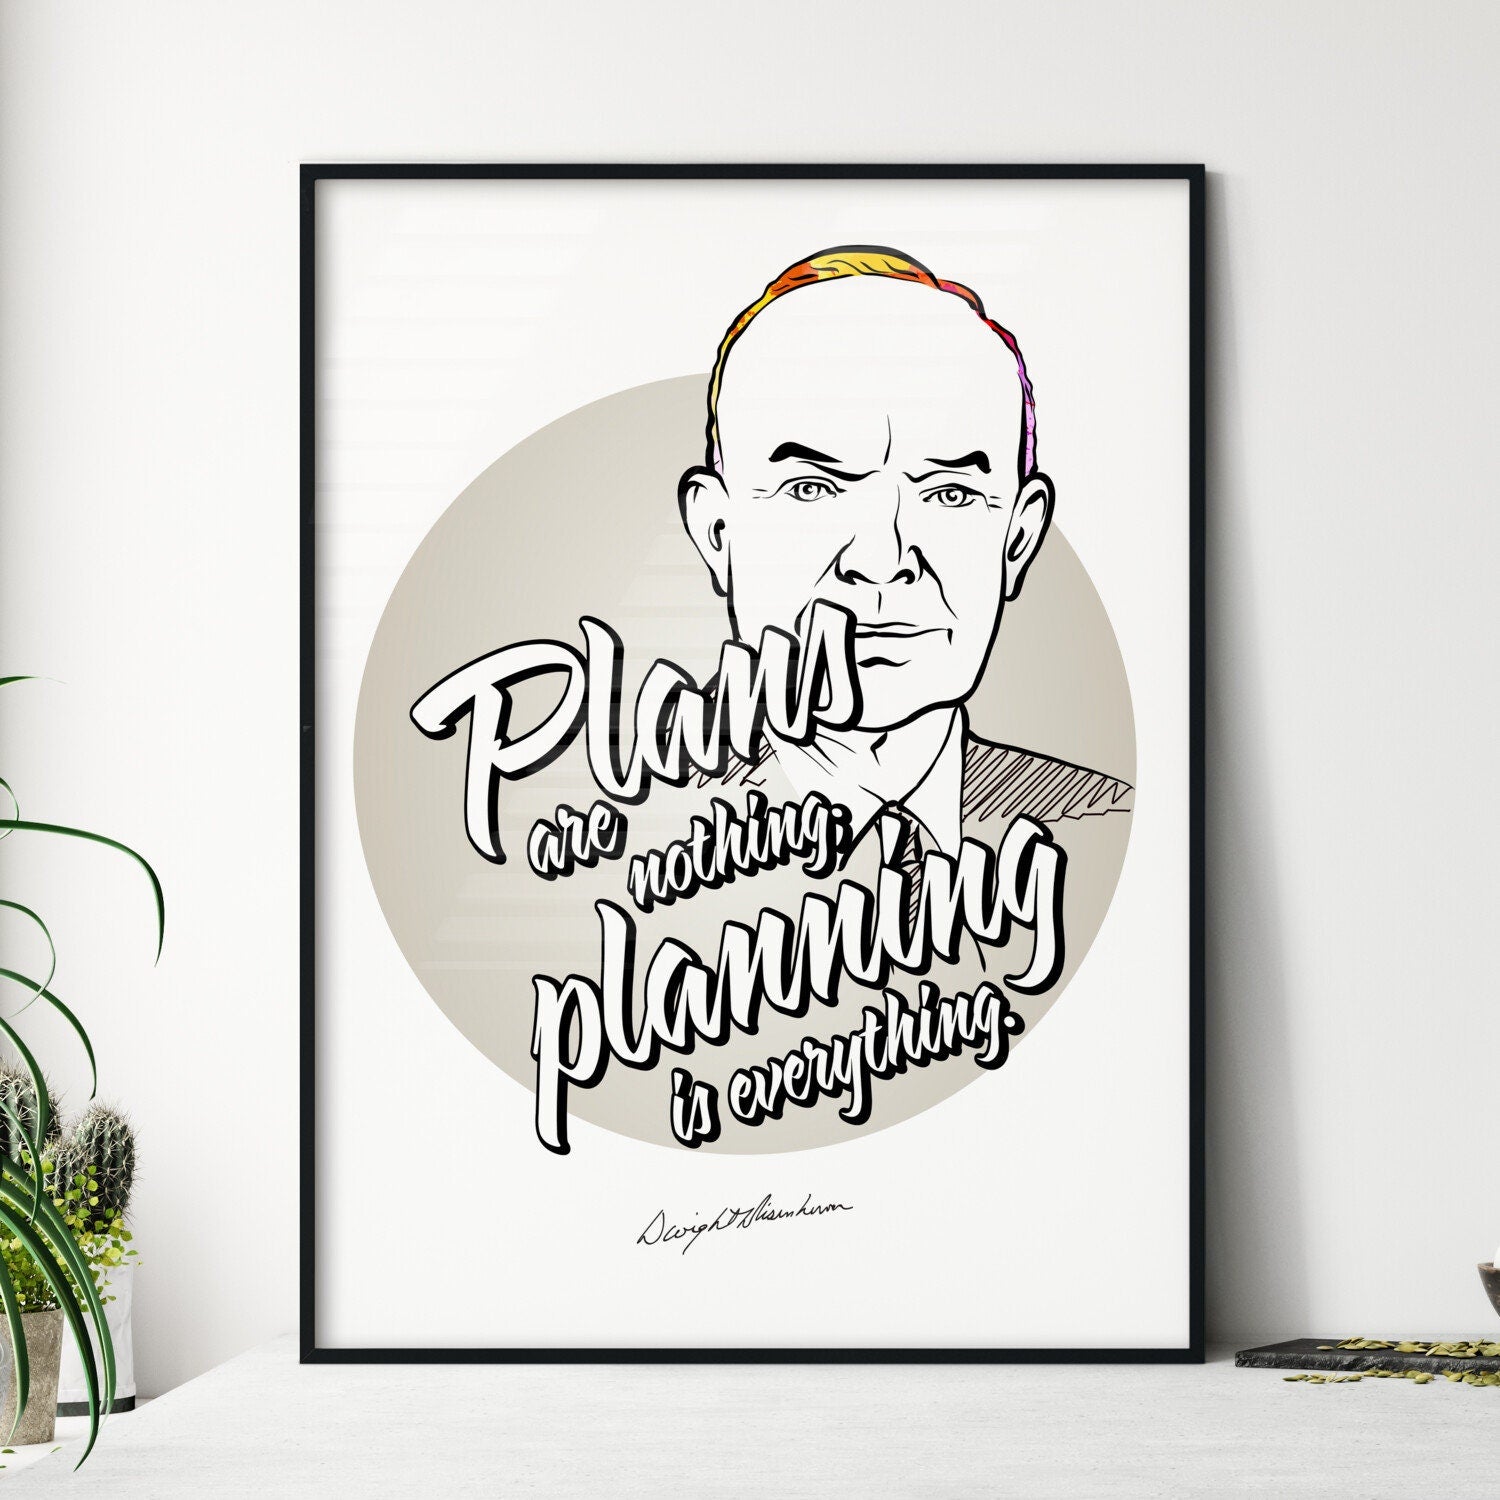 Plans Are Nothing; Planning Is Everything Lettering With Dwight D. Eisenhower Portrait. Perfect print for patriots.